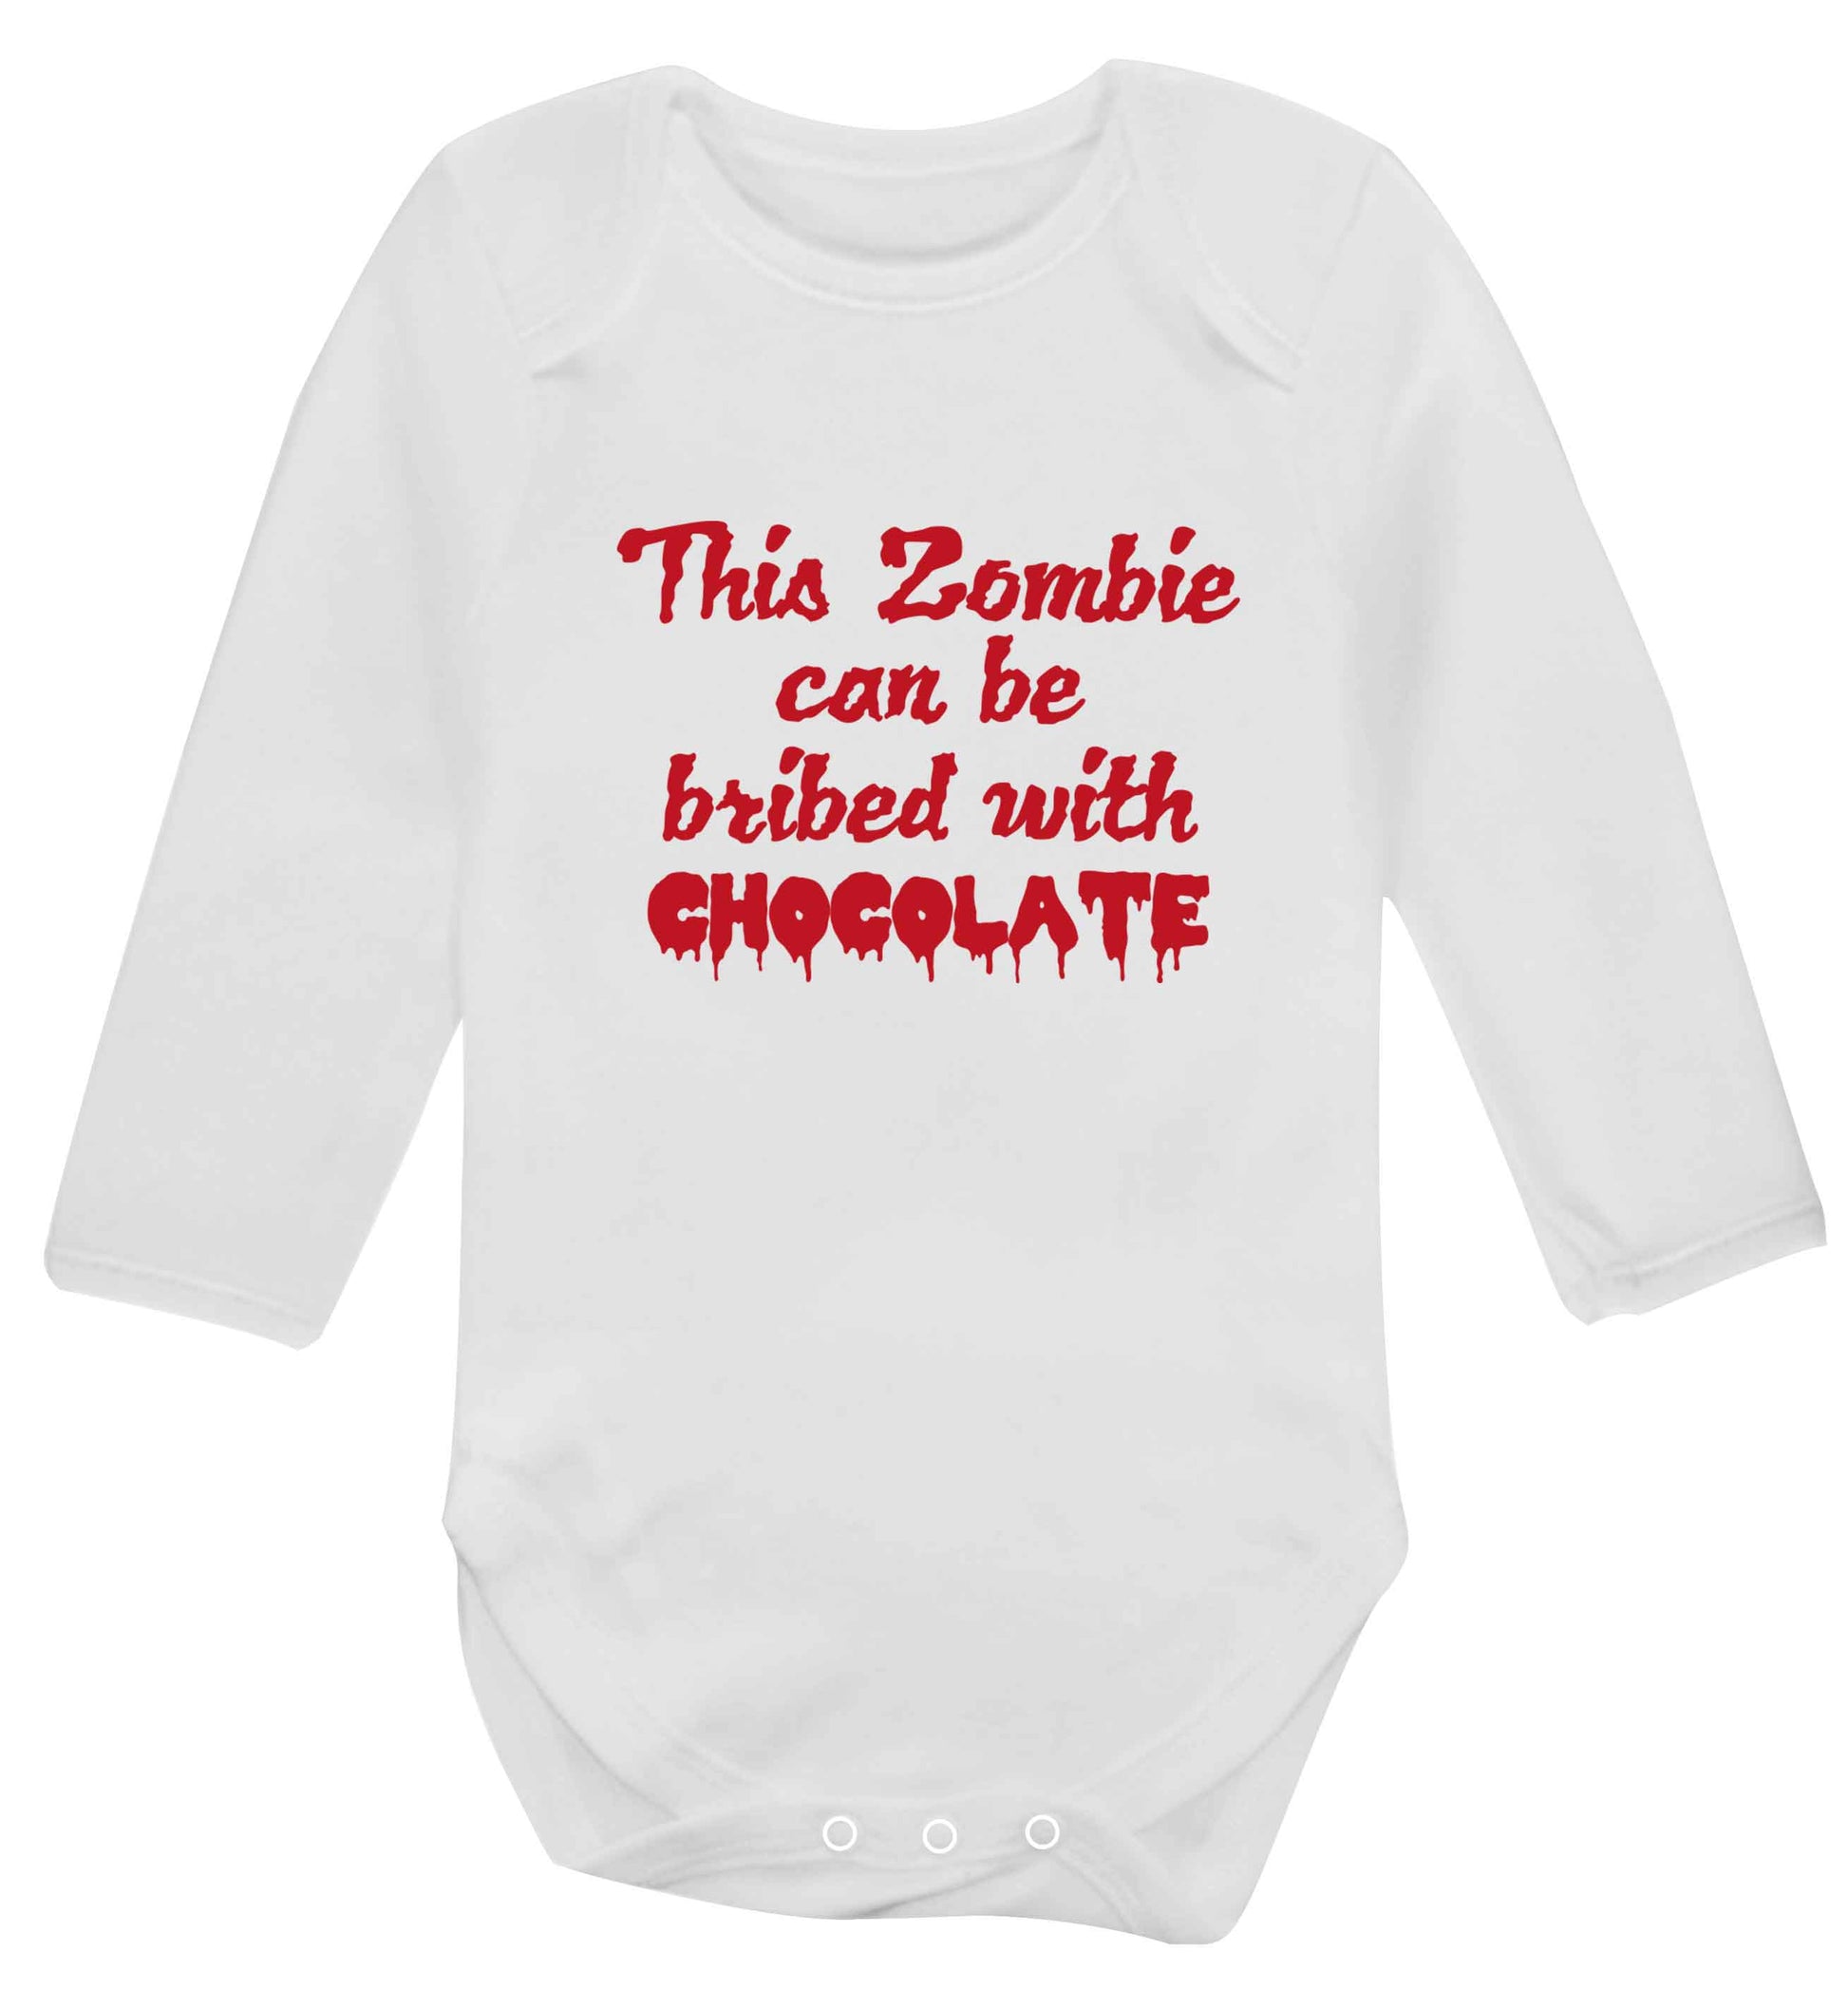 This zombie can be bribed with chocolate baby vest long sleeved white 6-12 months